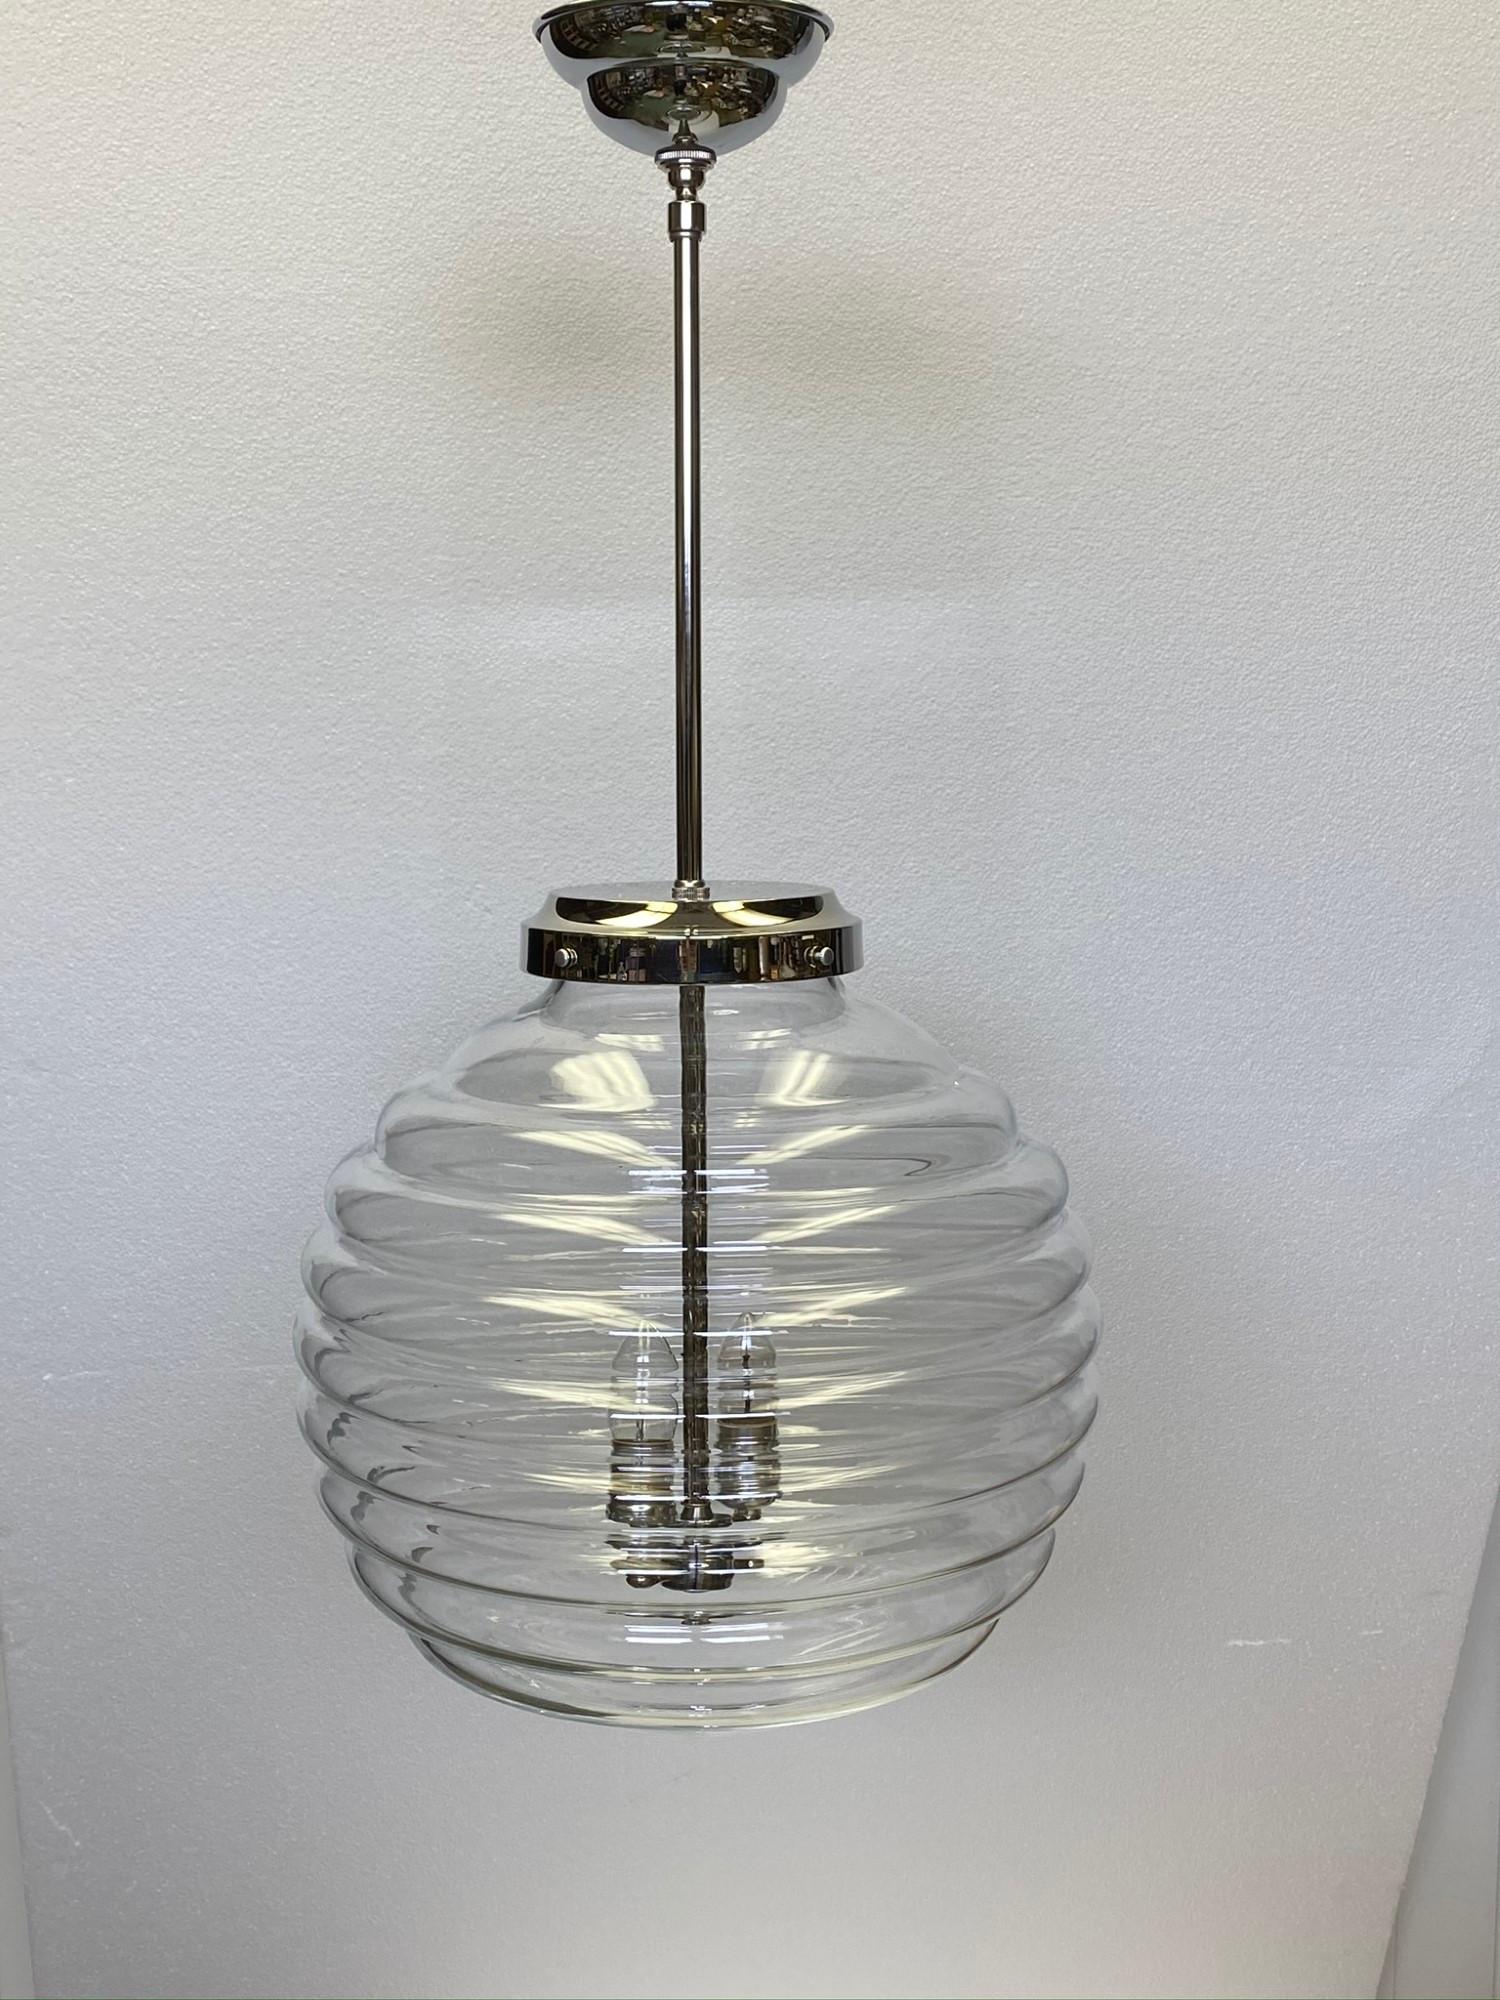 Large Murano hand blown beehive glass pendant light with nickel over brass fitter from the early 2000s. Uses two standard base bulbs. Cleaned and rewired. Small quantity available at time of posting. Priced each. Please inquire. Please note, this